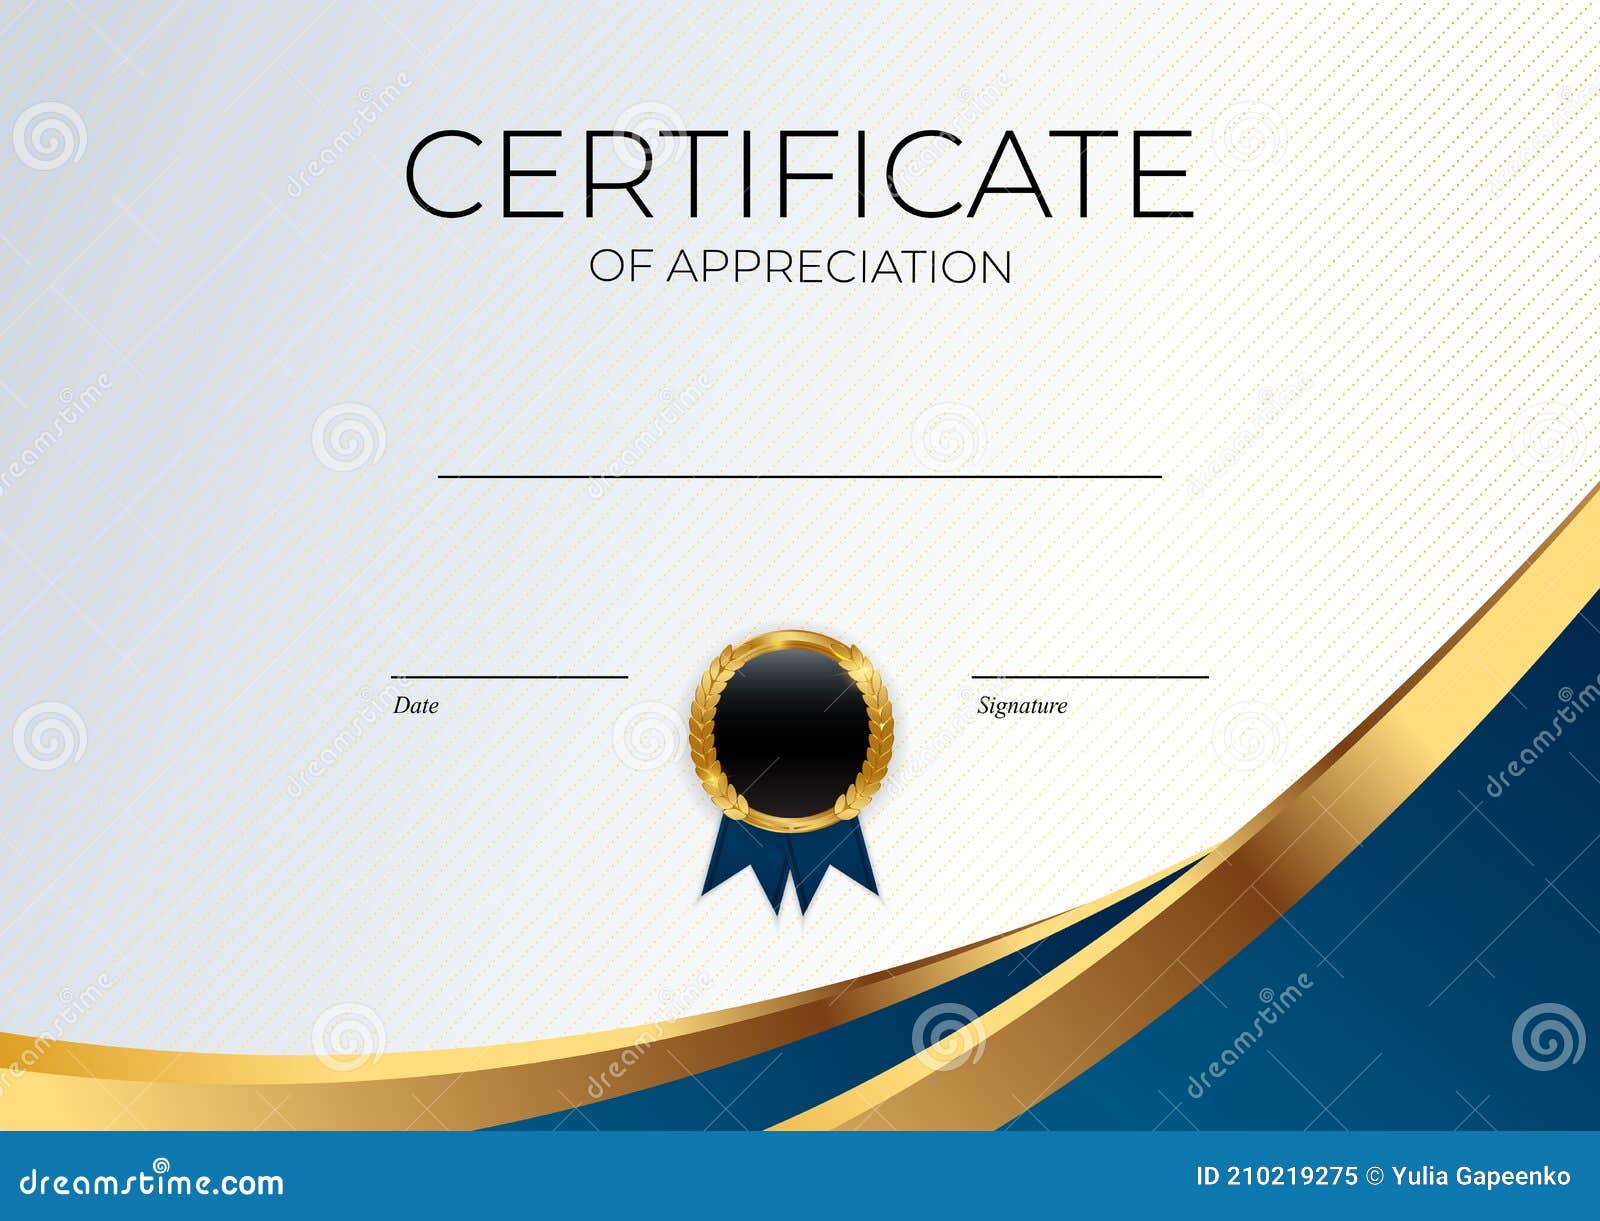 Blank Certificate Background Stock Illustrations – 59,656 Blank Certificate  Background Stock Illustrations, Vectors & Clipart - Dreamstime